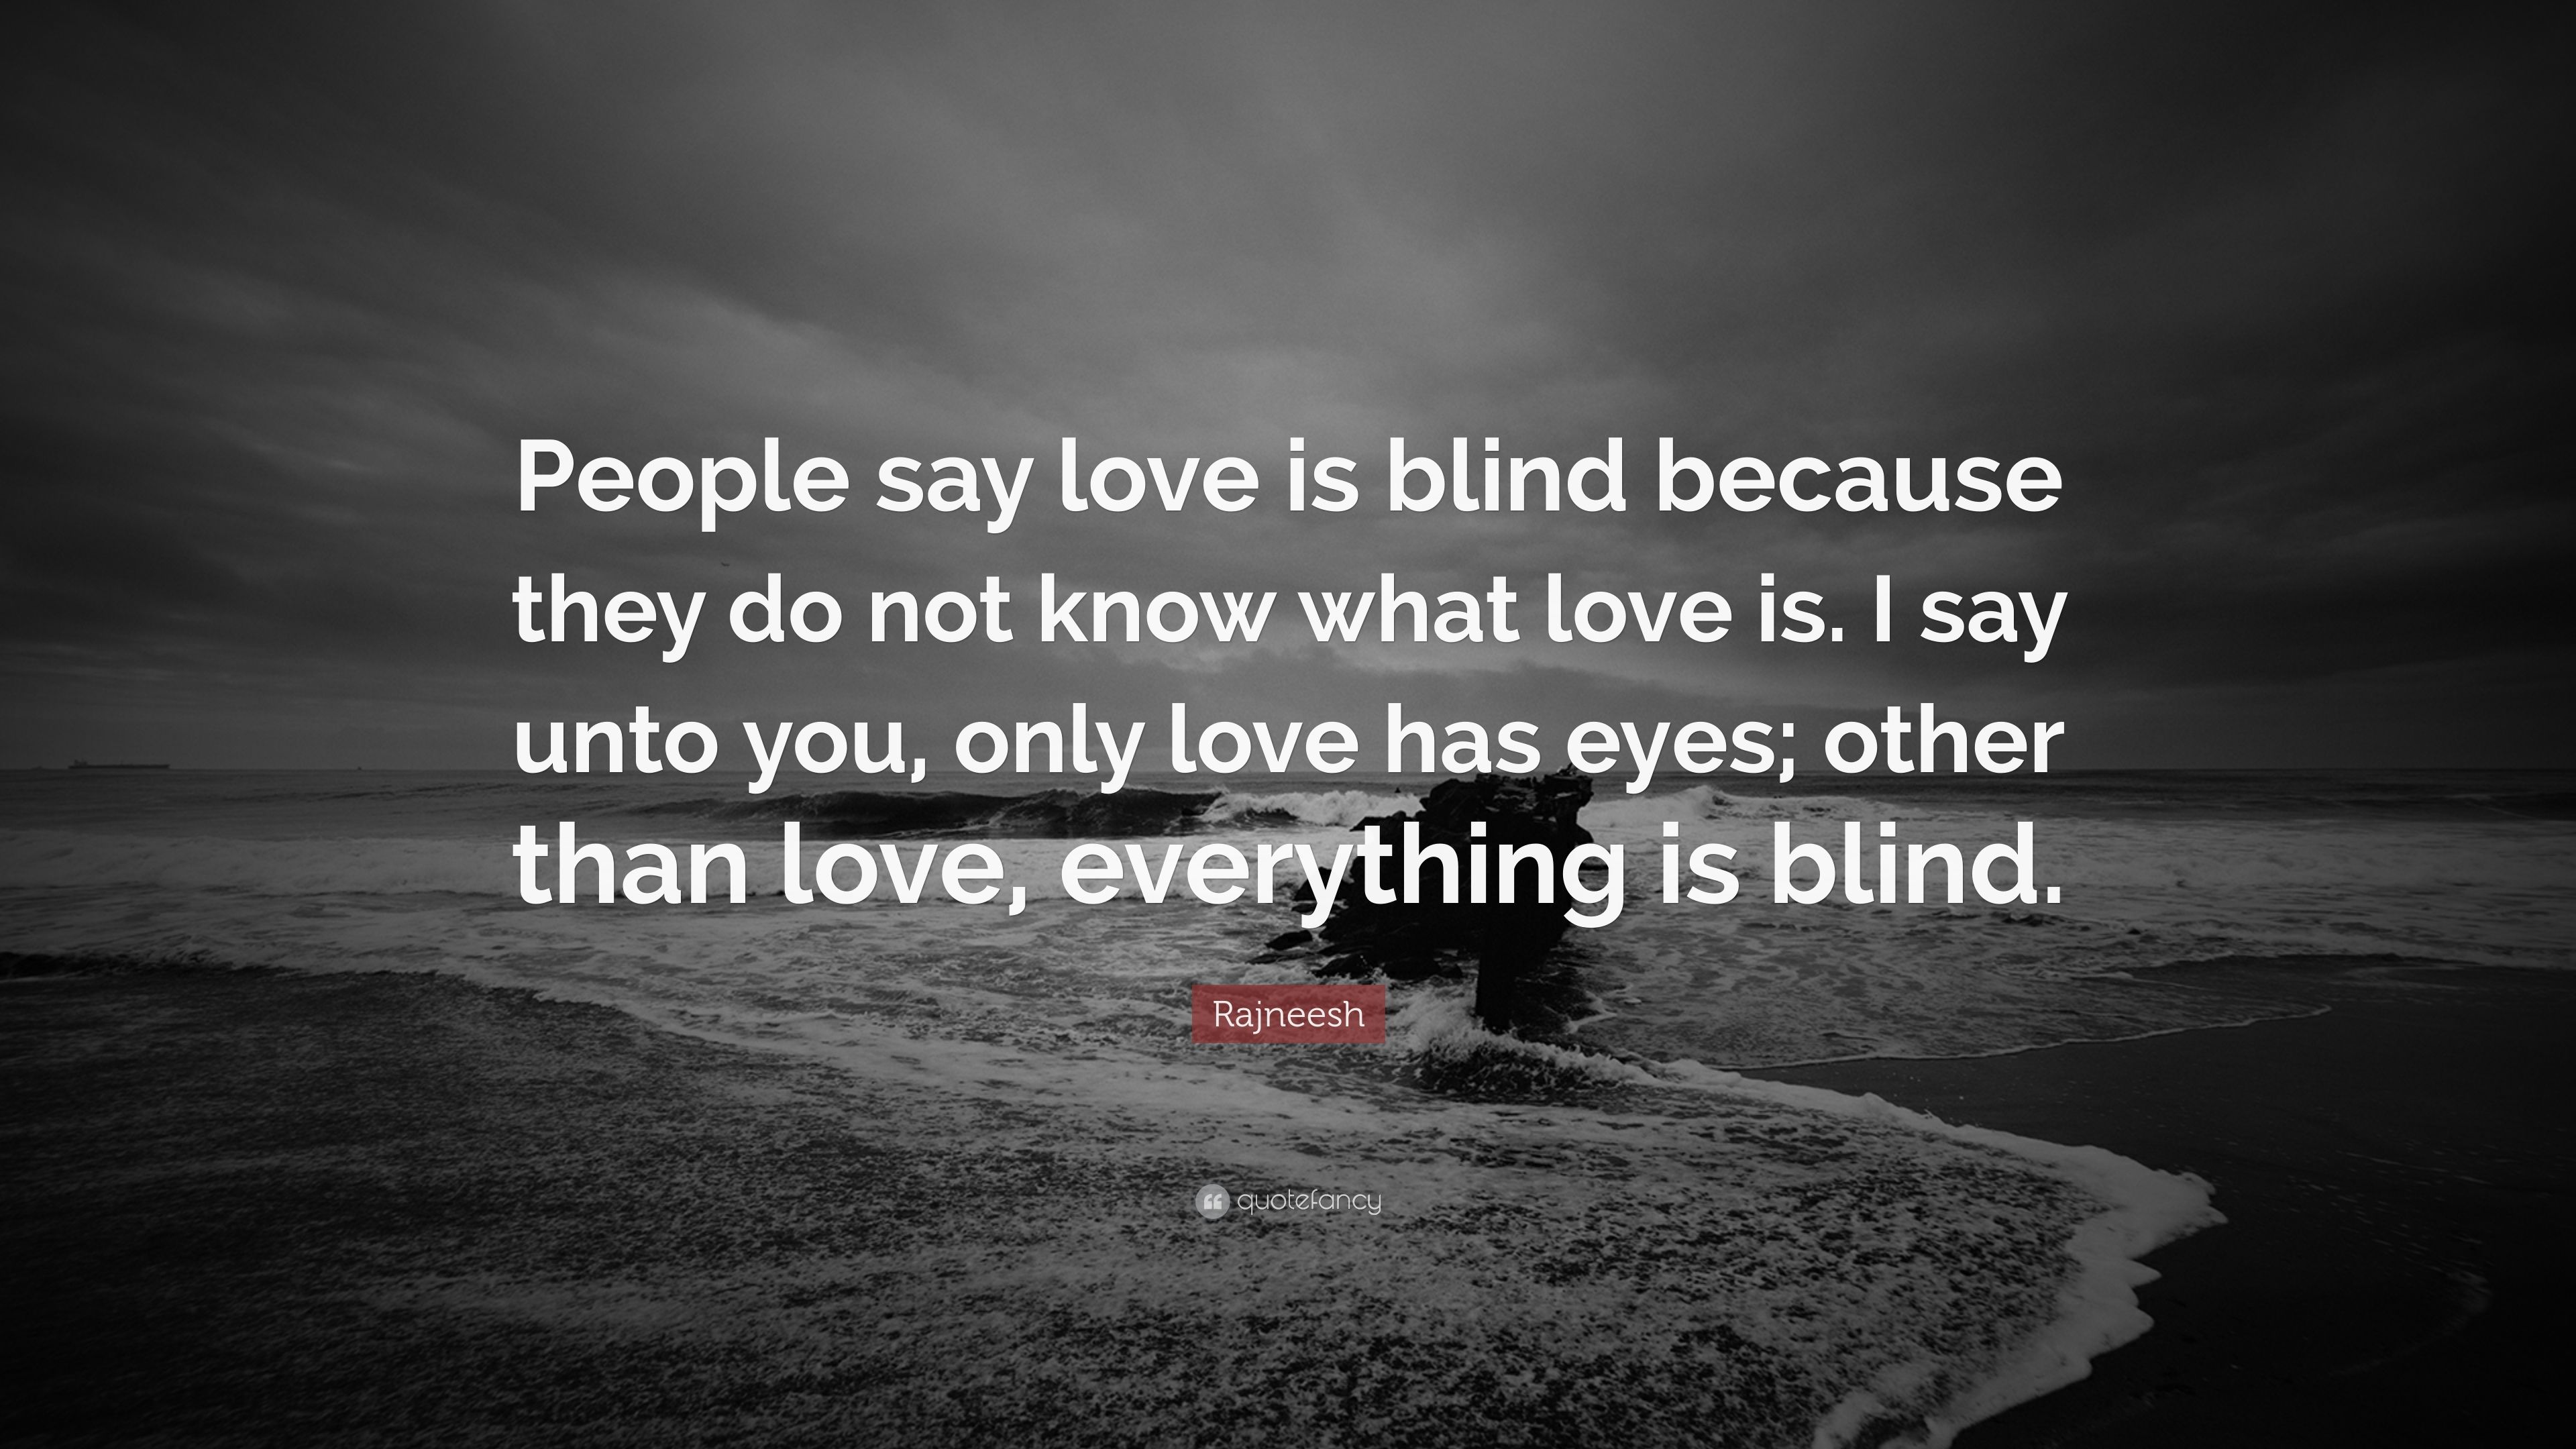 Rajneesh Quote: “People say love is blind because they do not know